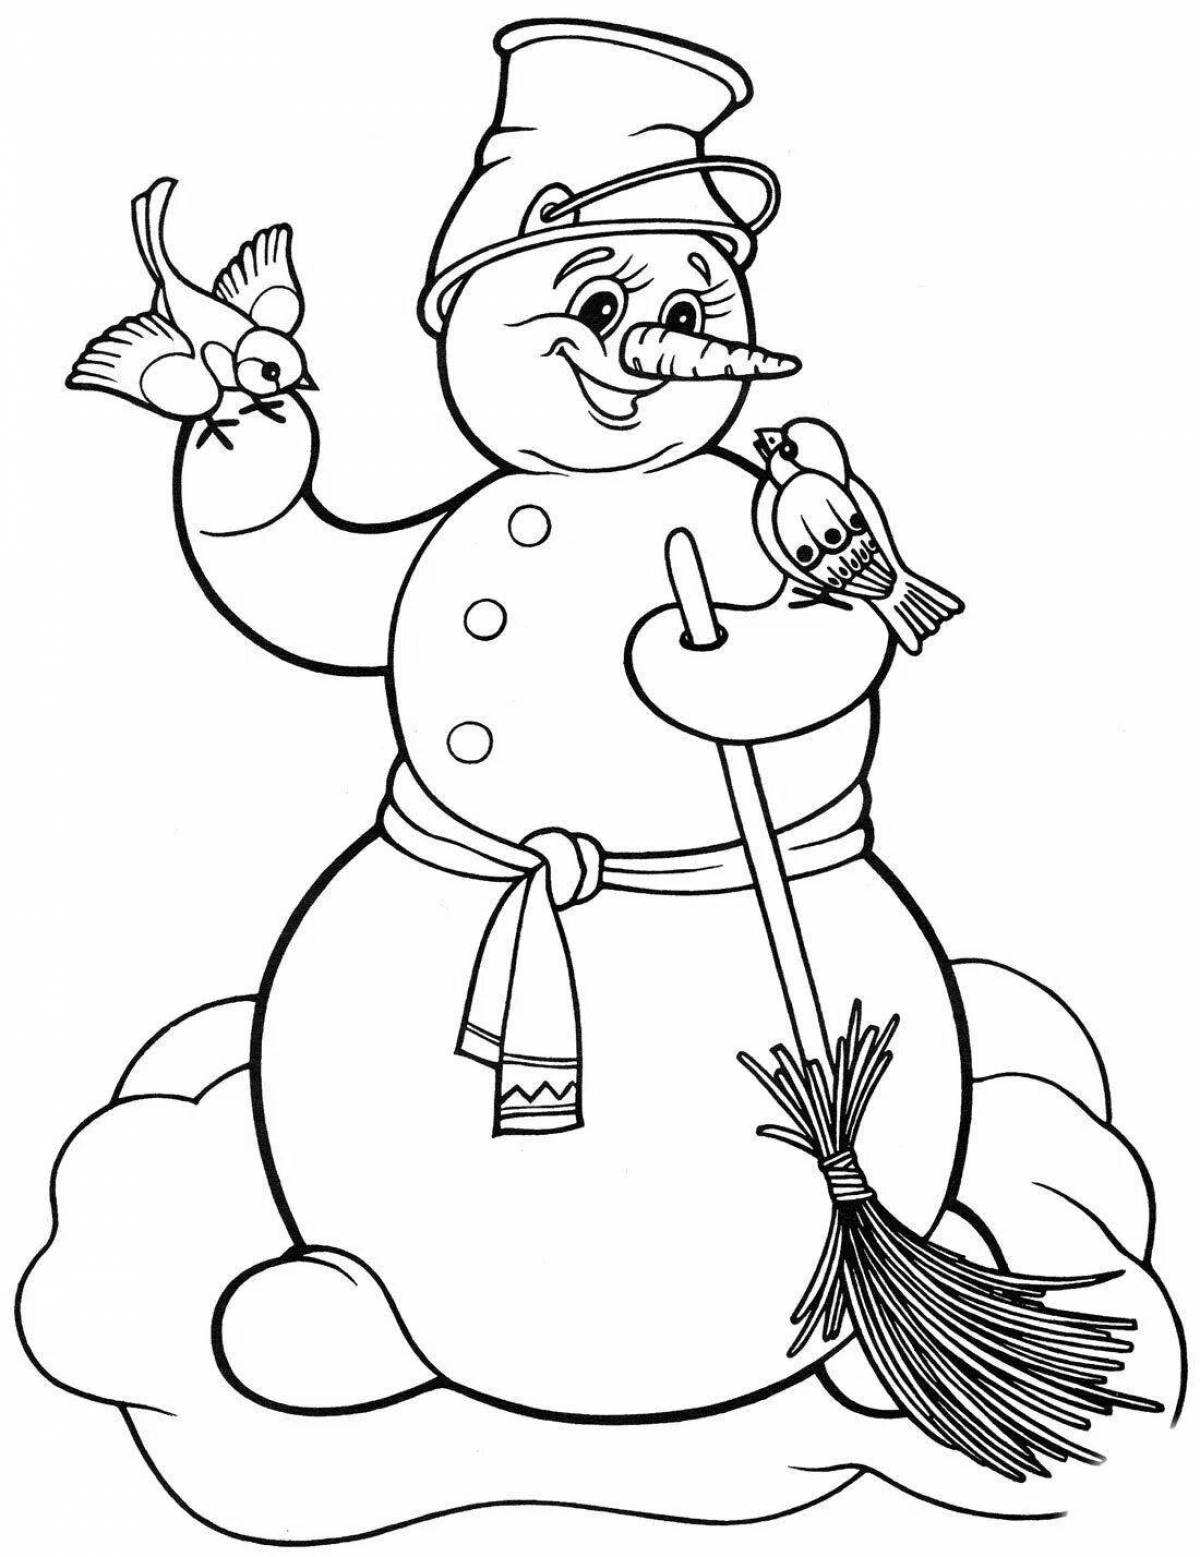 Coloring page playful snowman's birthday